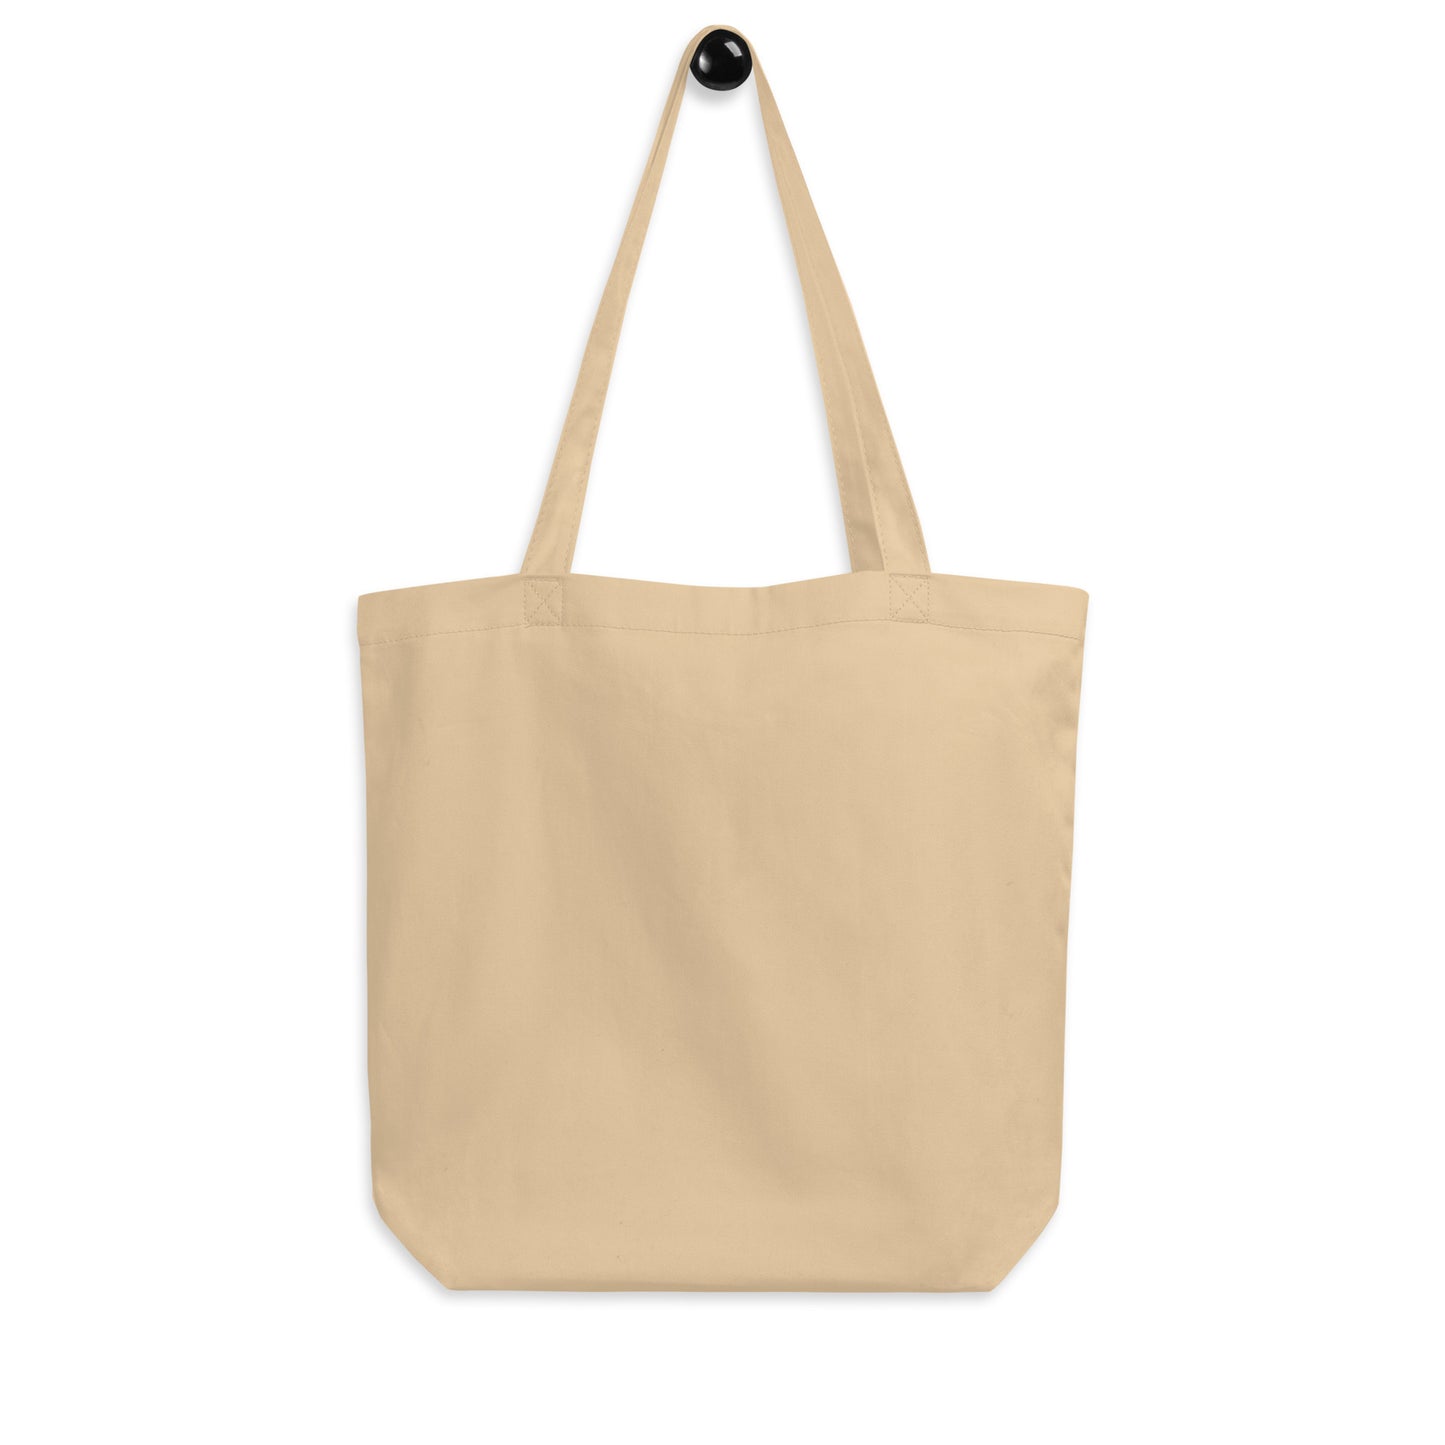 Aviation Gift Organic Tote - Black • YVR Vancouver • YHM Designs - Image 05